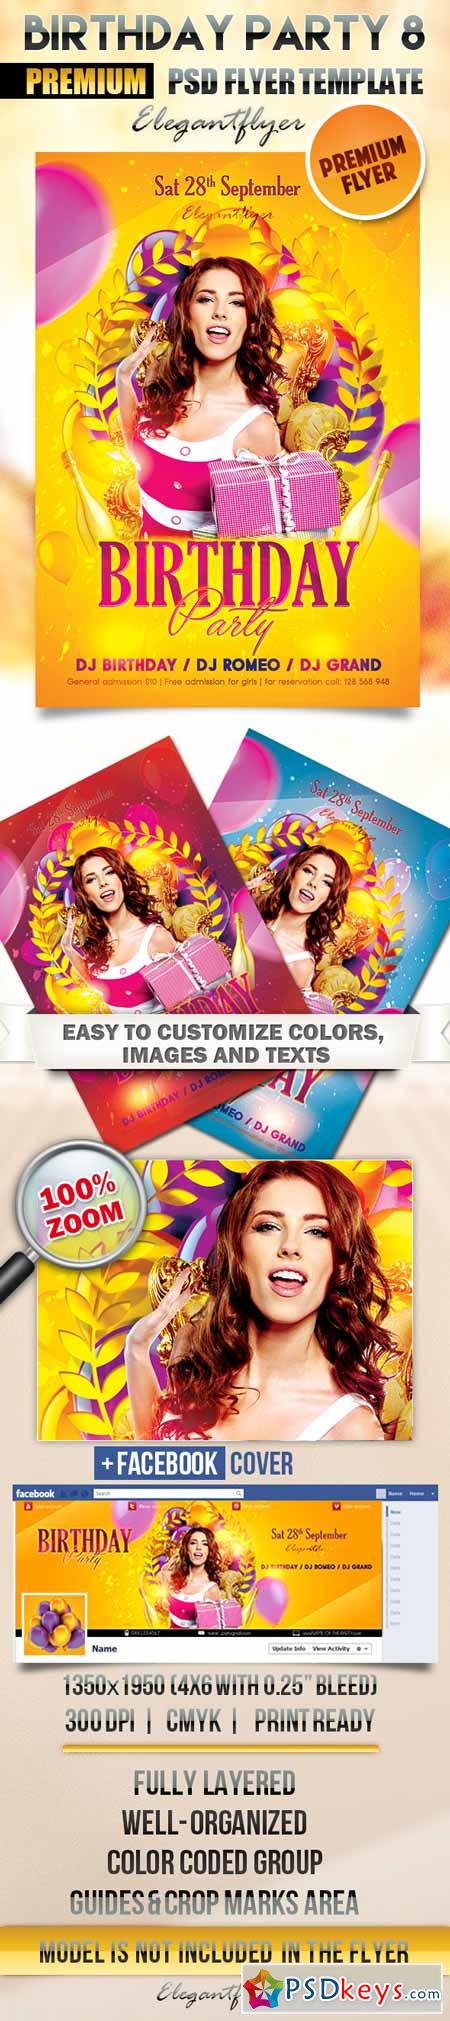 Birthday Party 8 – Flyer PSD Template + Facebook Cover